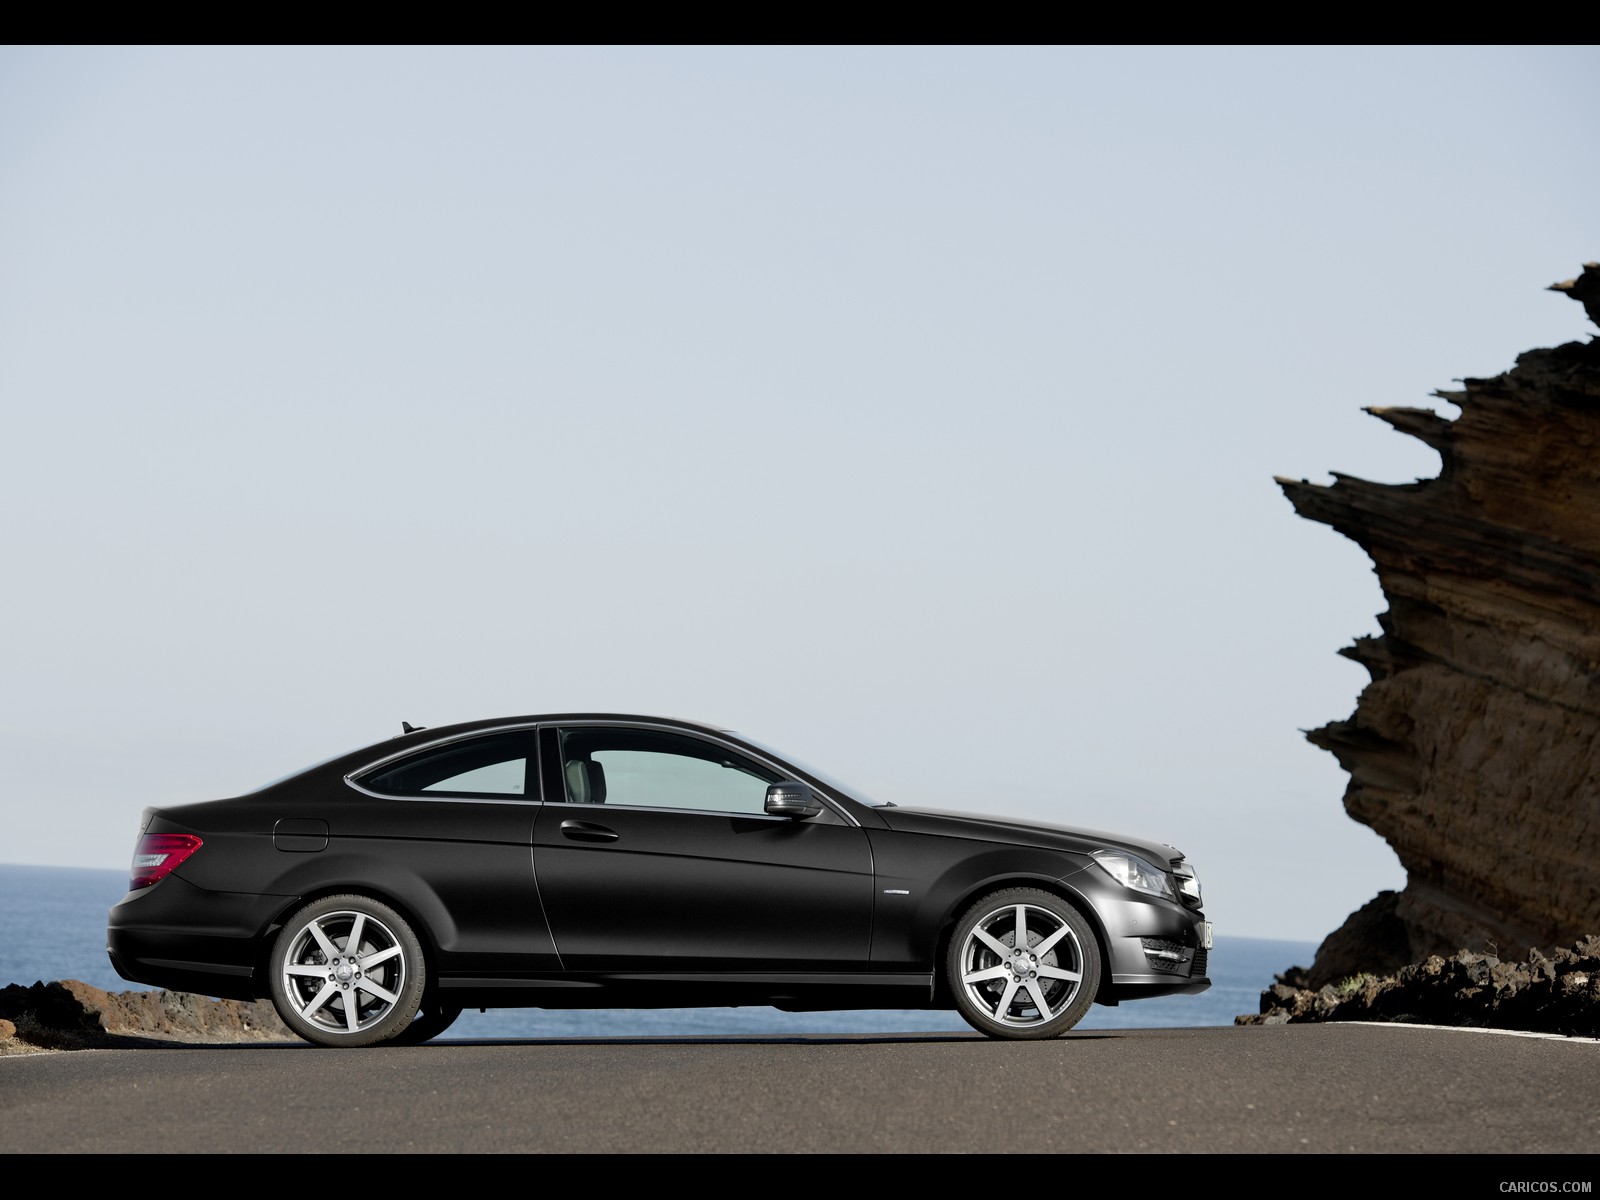 Mercedes-Benz C-Class Coupe (2012)  - Side, #7 of 79